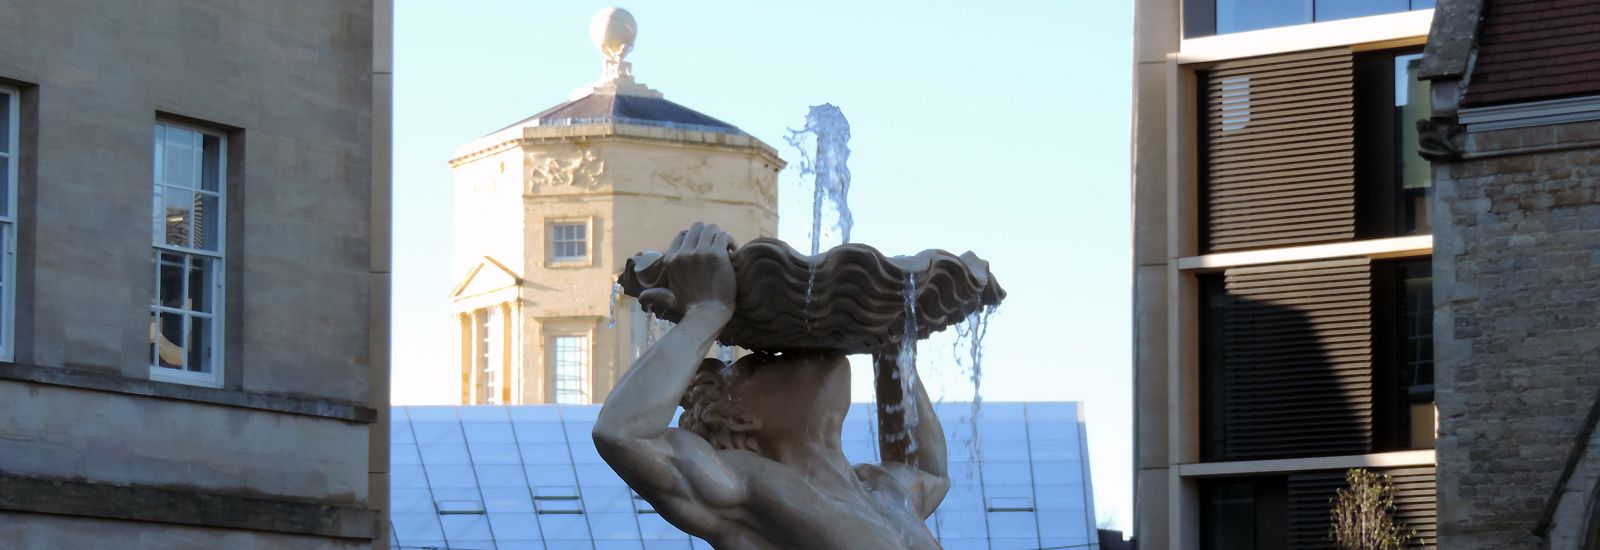 A water fountain with the Radcliffe Observatory Tower behind